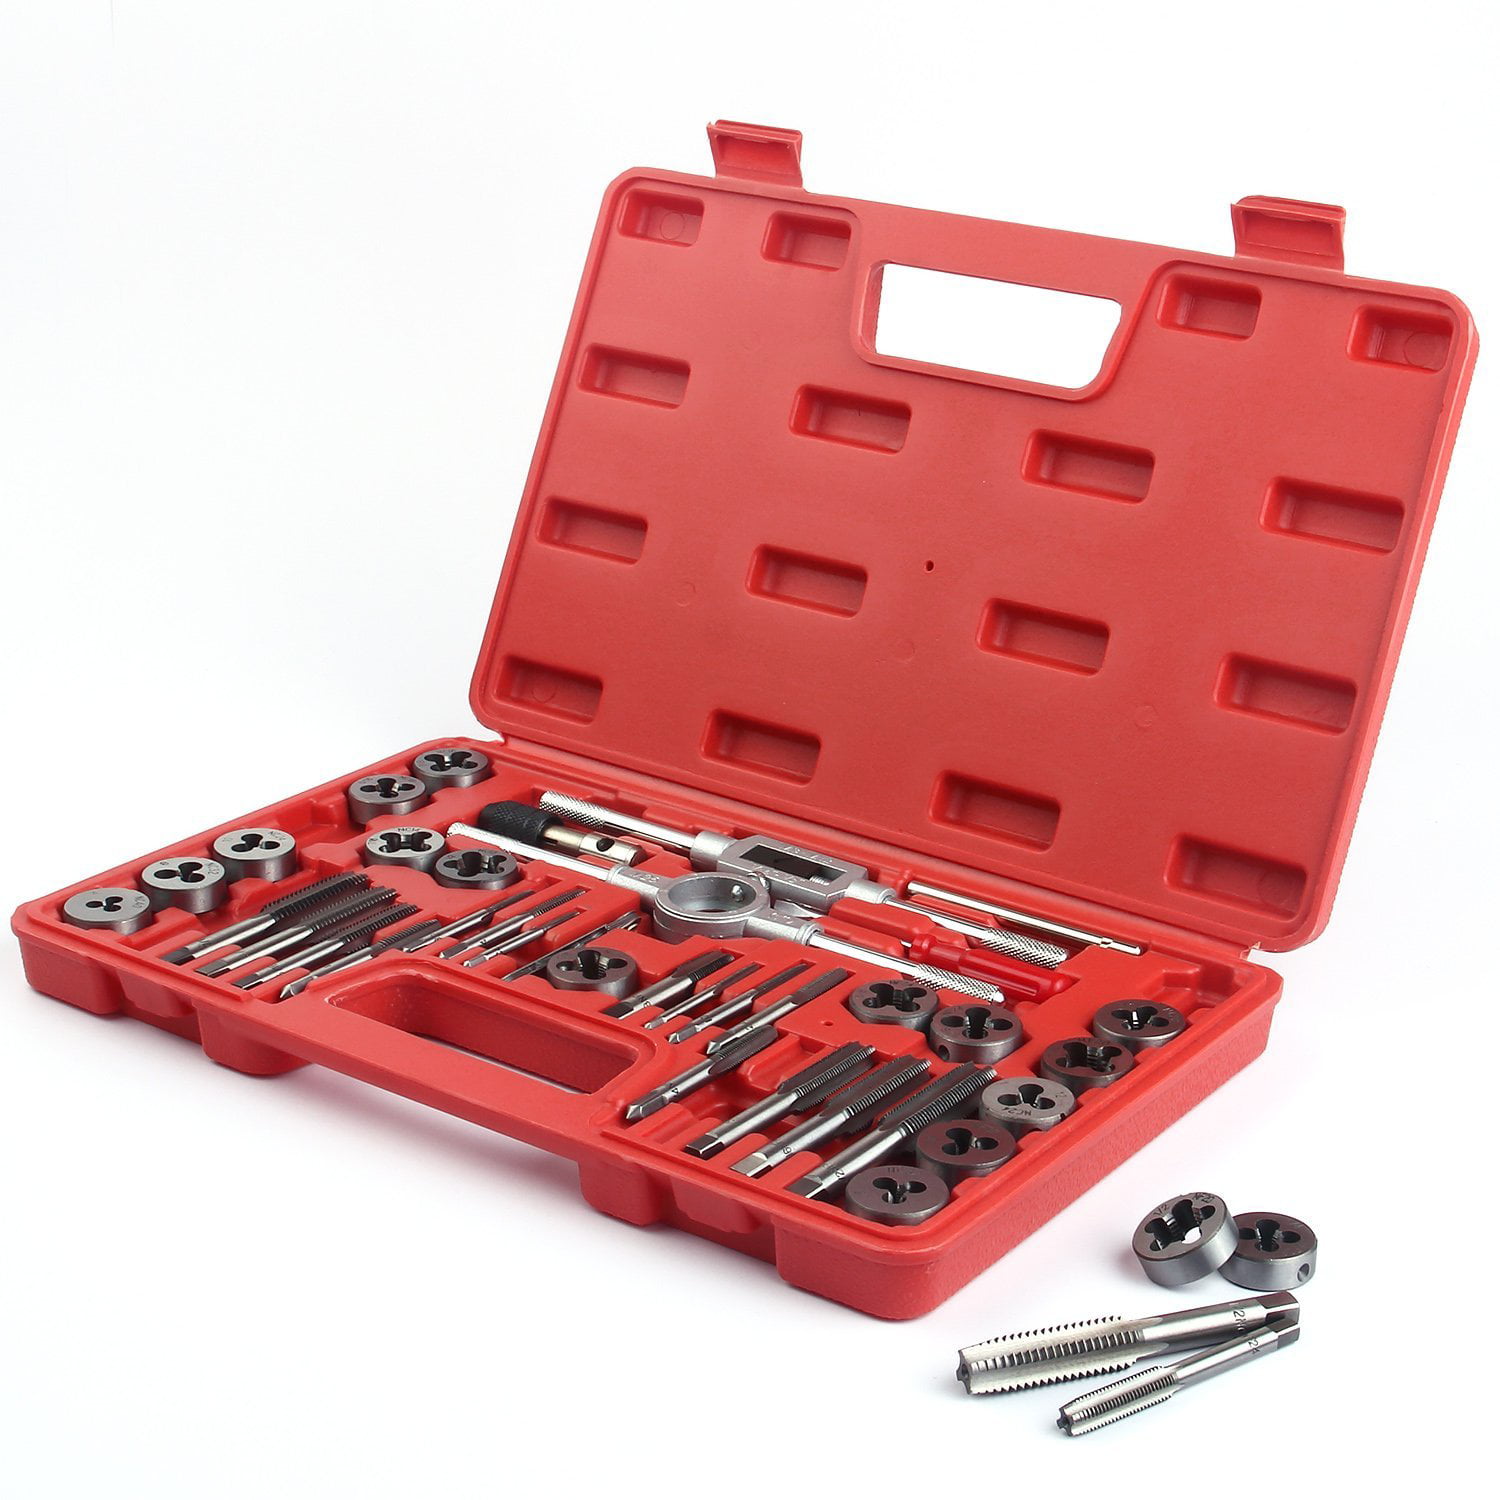 NF NPT by NAKAO SAE Thread Types: NC for Cutting External and Internal Threads Essential Threading Tool with Complete Accessories and Storage Case 40 Piece Tap and Die Set,SAE Inch Sizes 